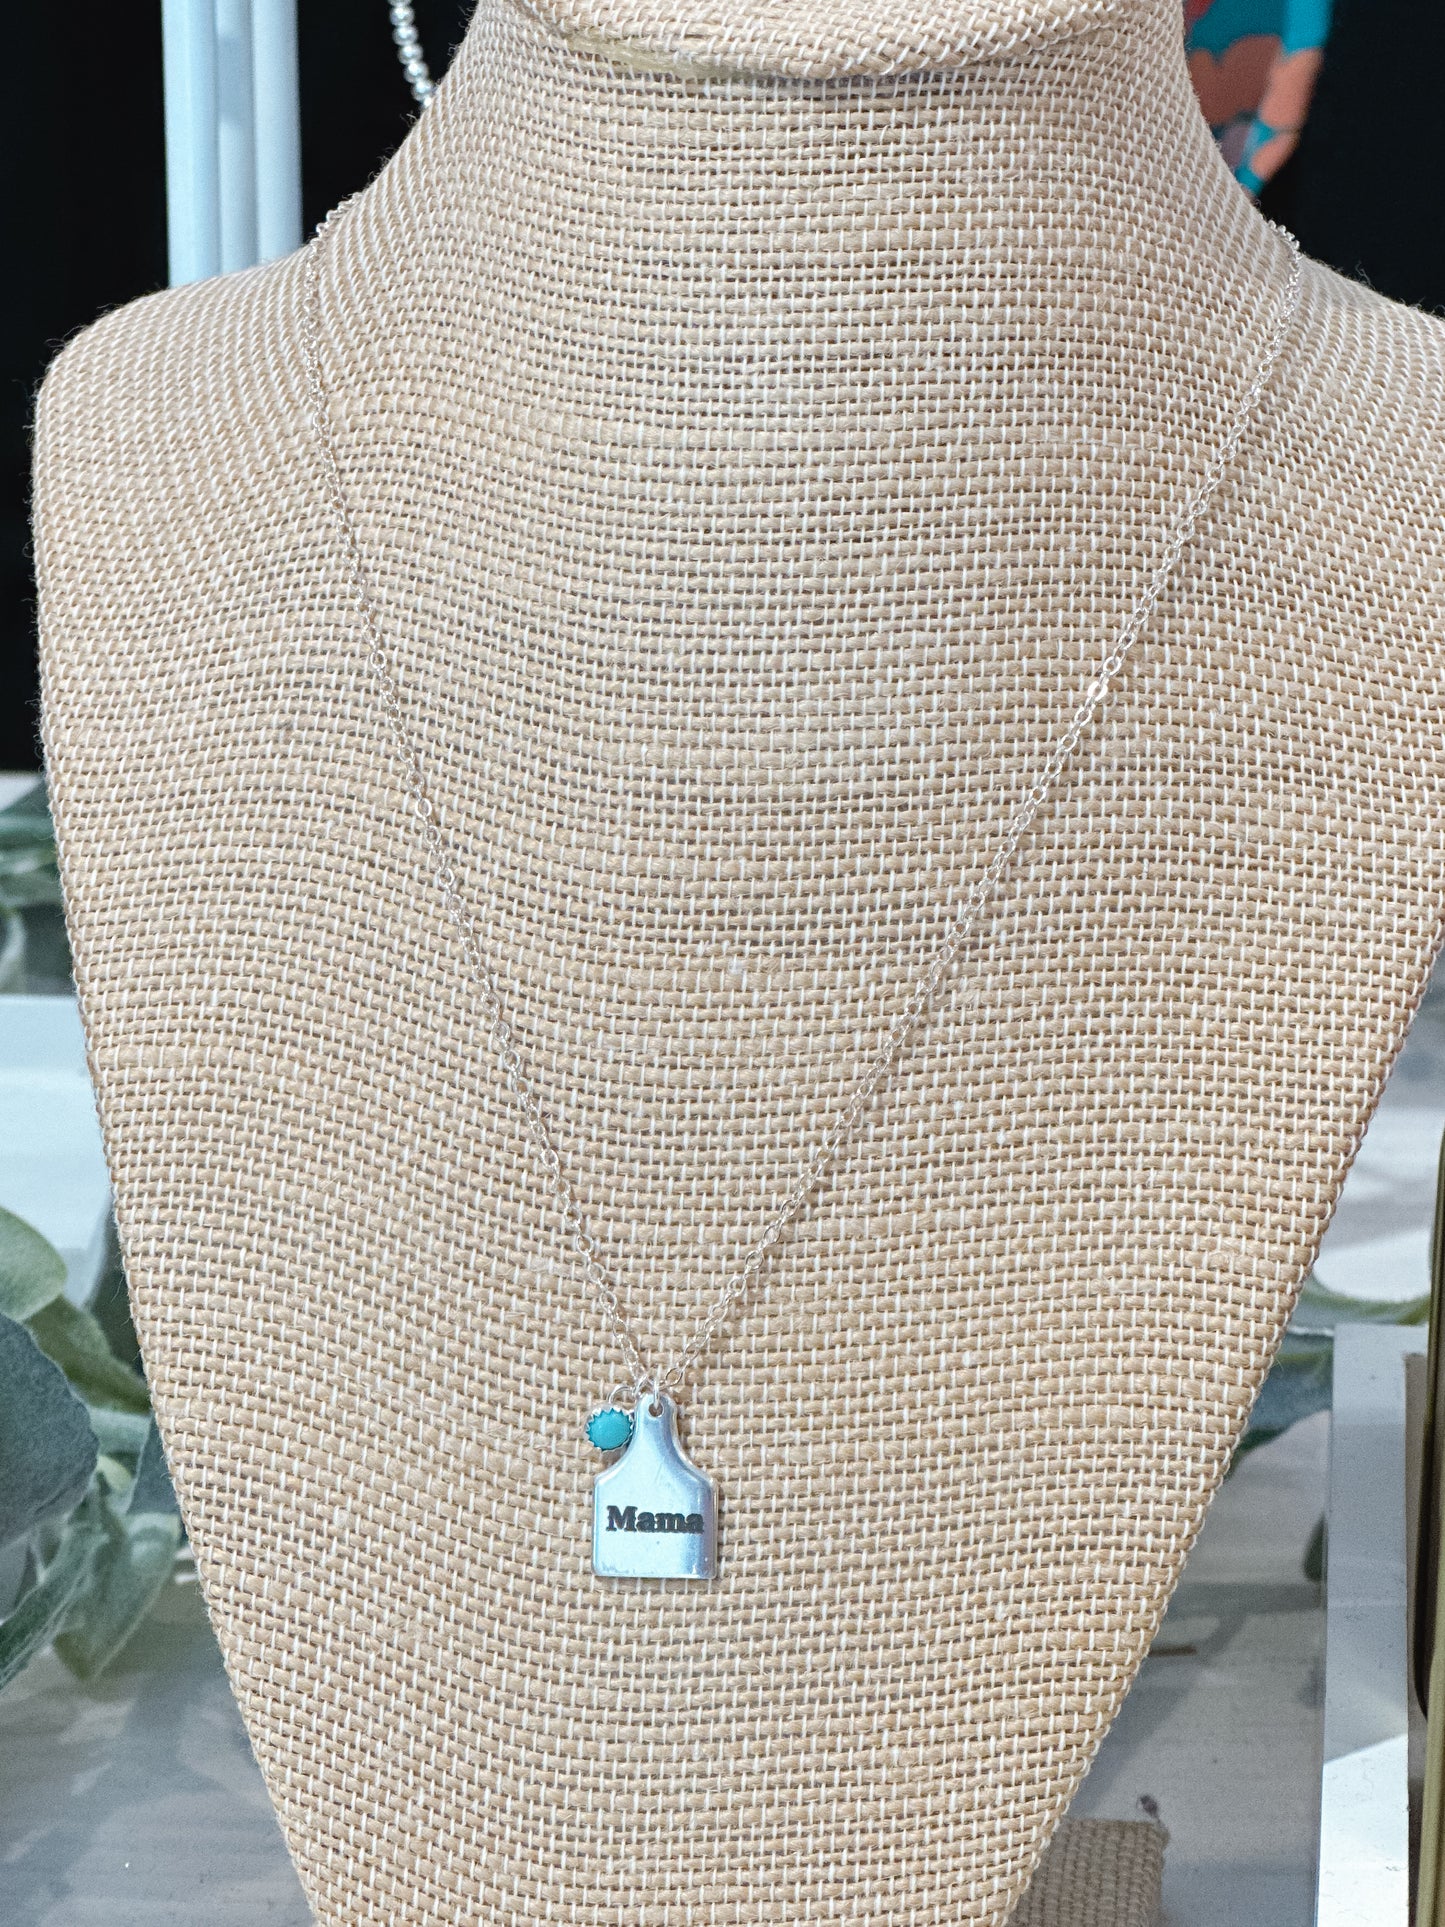 Mama Cattle Tag & Kingman Turquoise Sterling Silver Charm Necklace